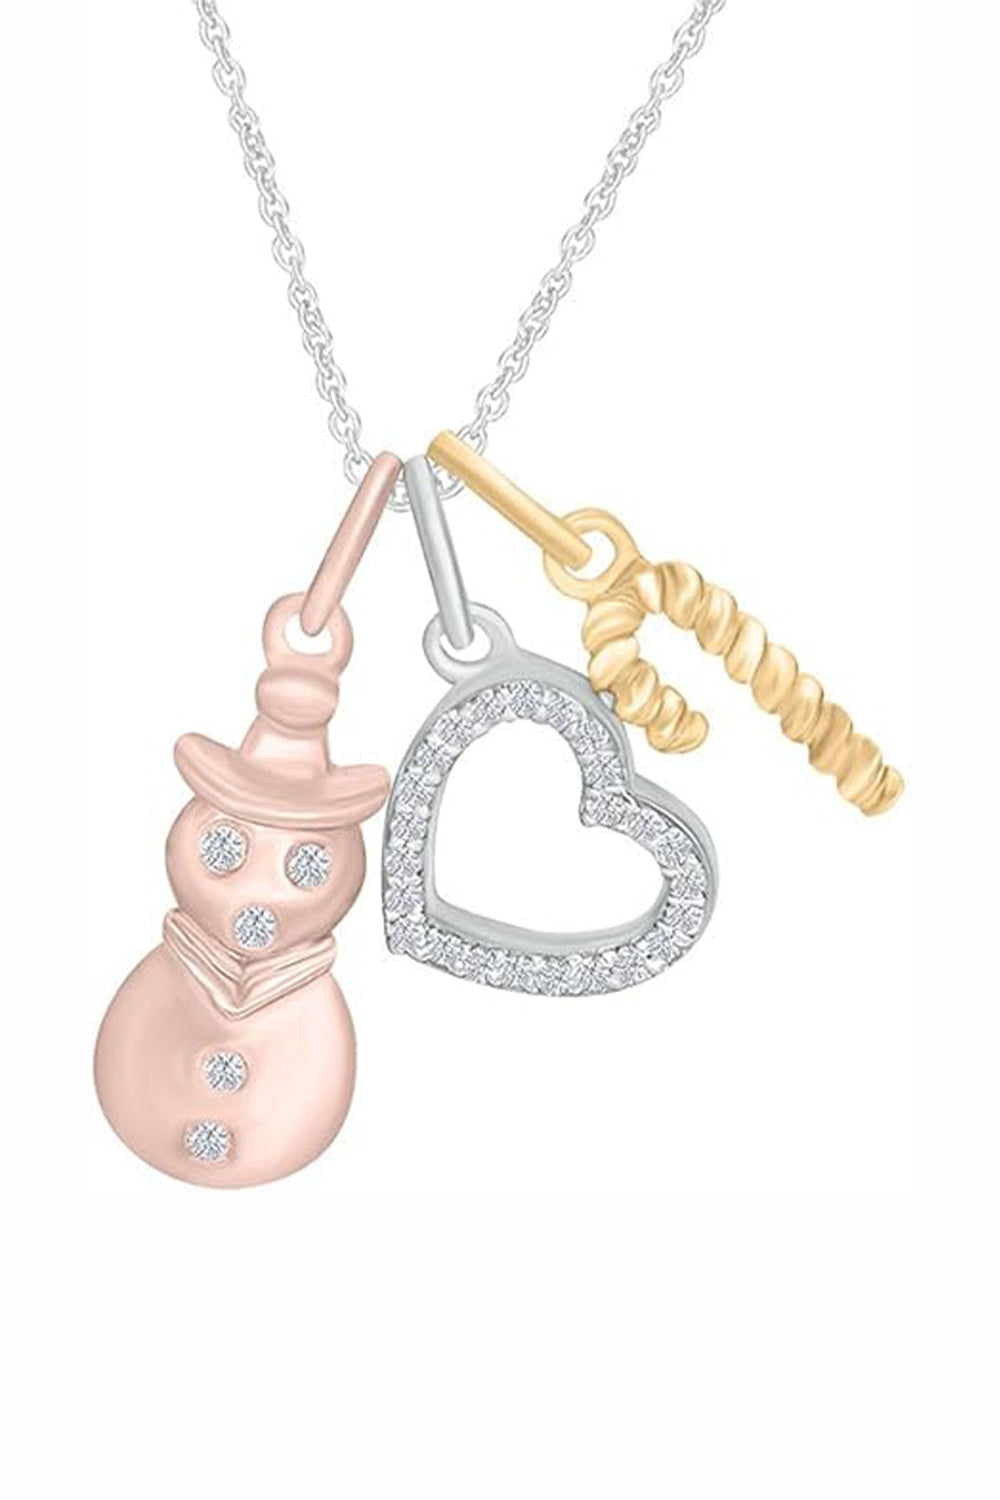 Moissanite Snowman, Heart and Candy Cane Charms Pendant Necklace in 18k Two tone Gold Plated Sterling Silver.